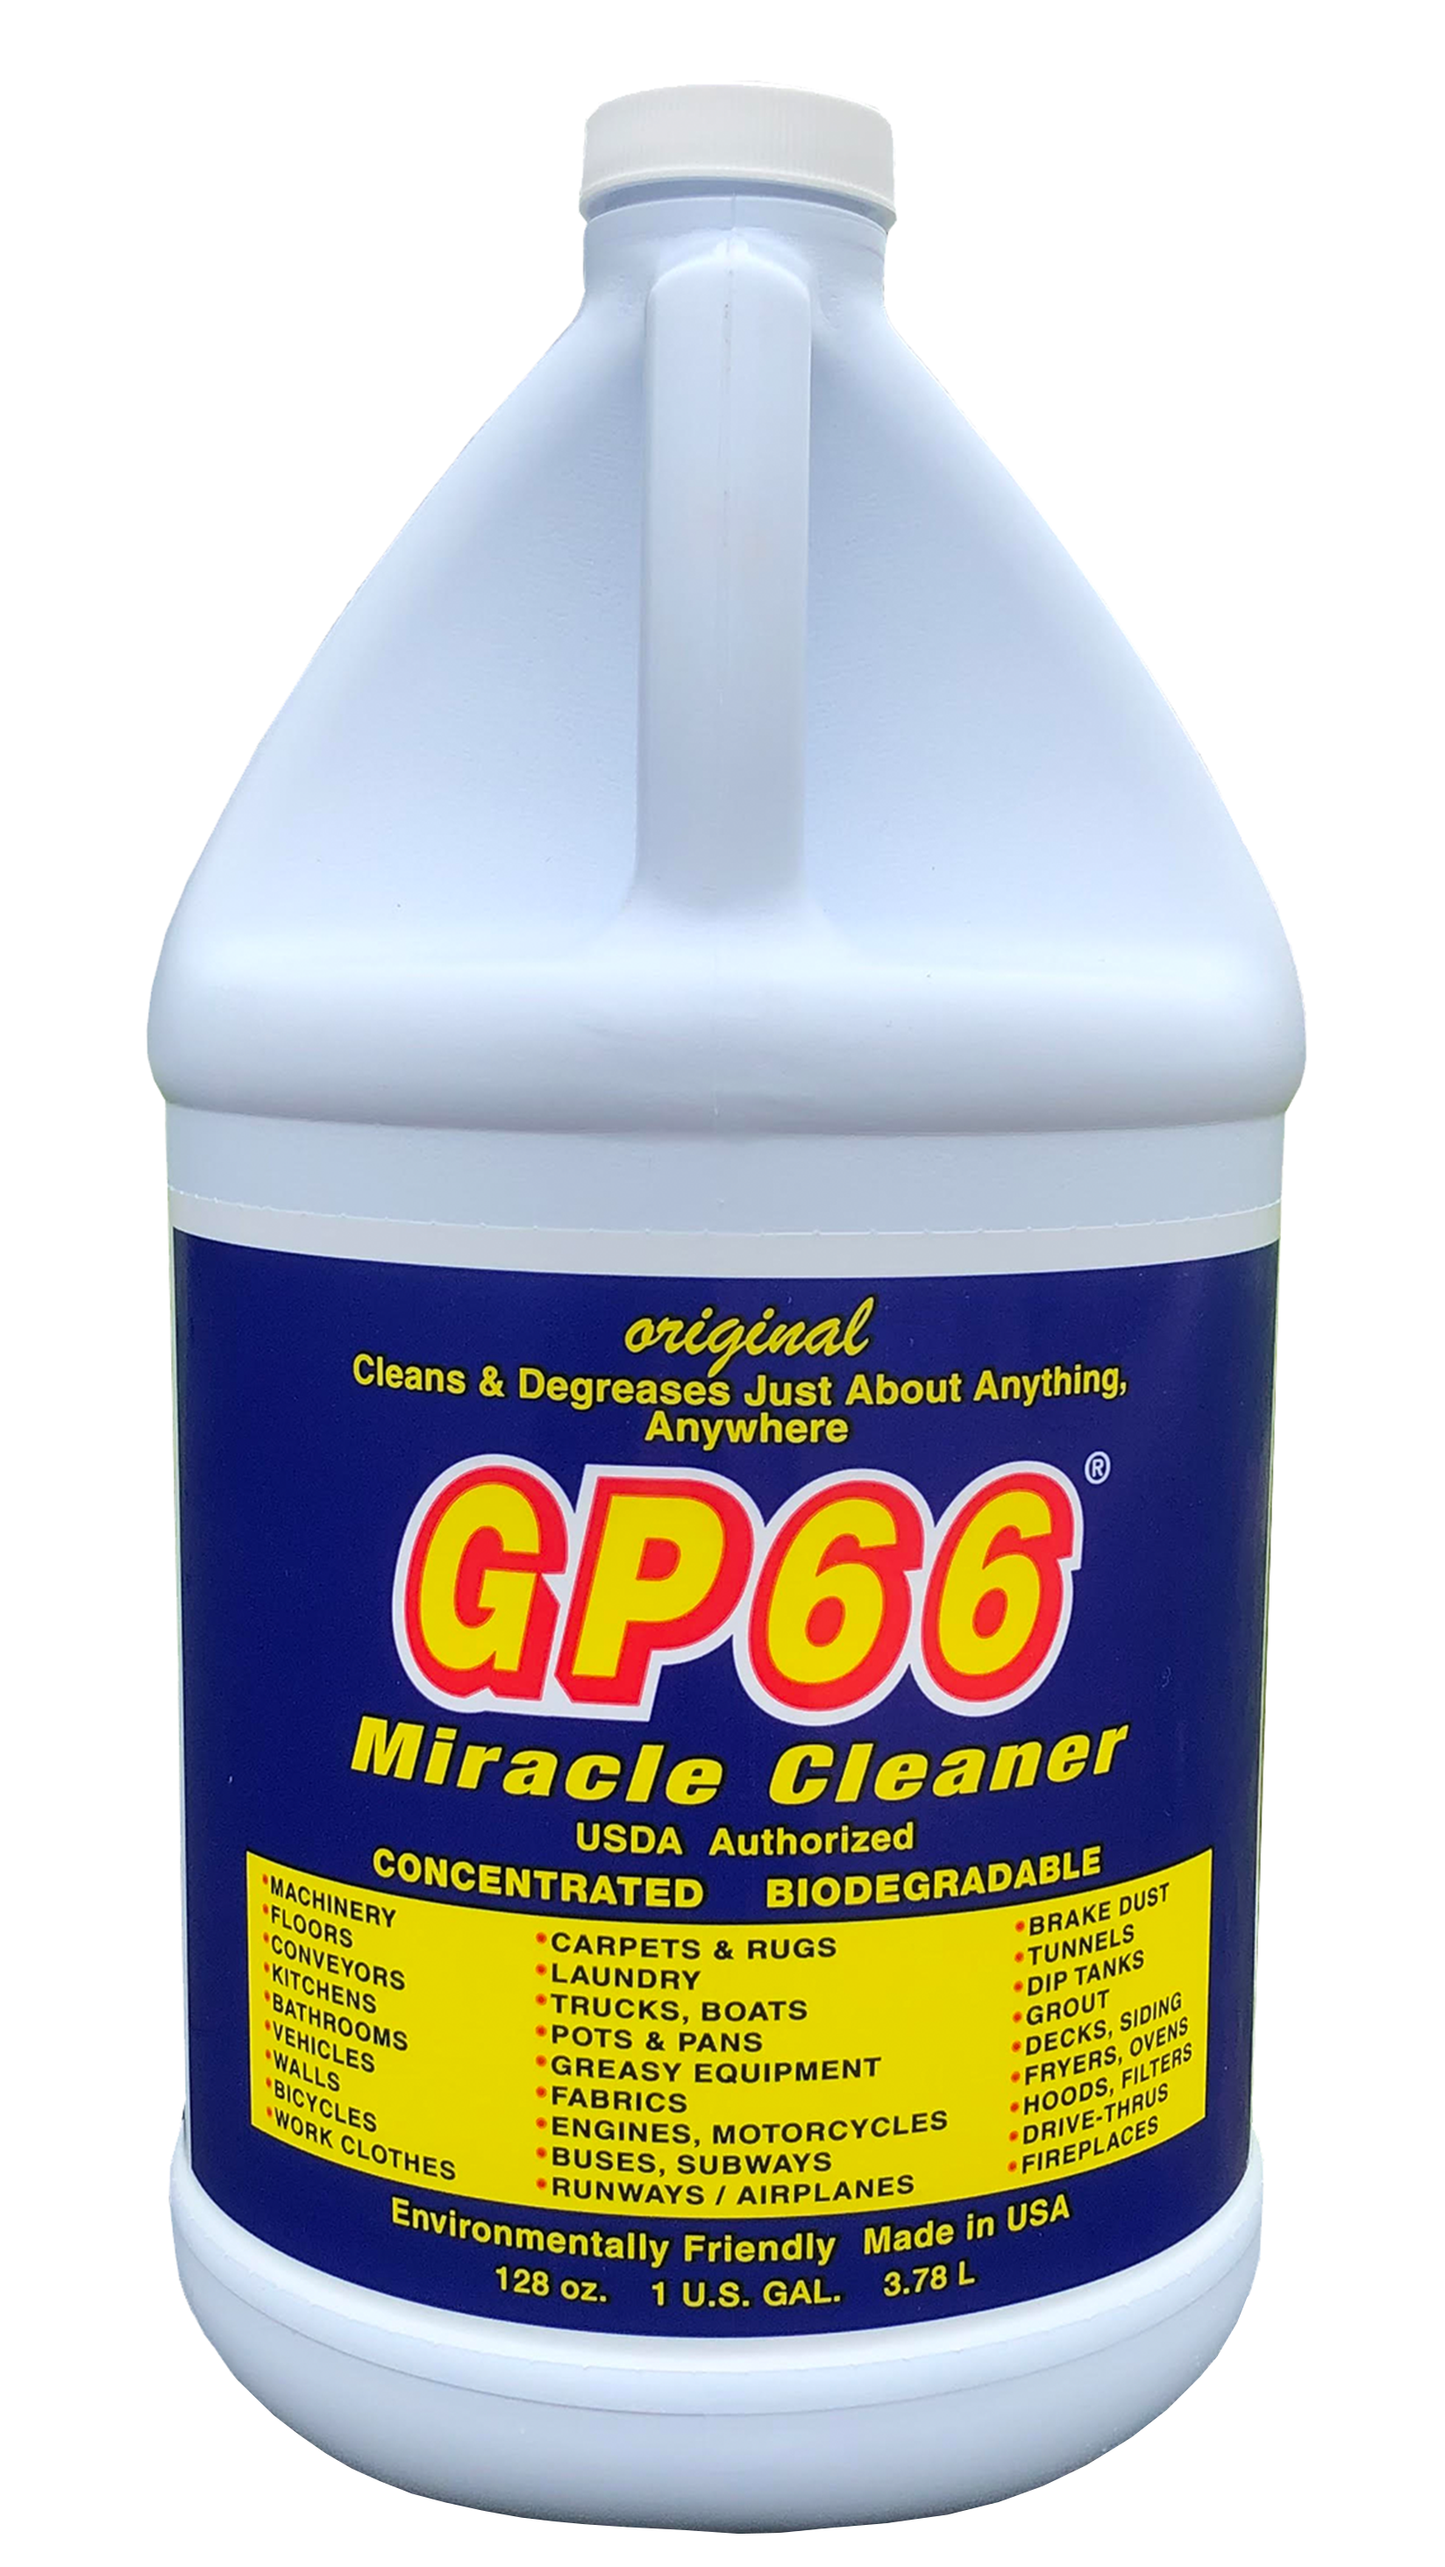 gp66 miracle cleaner CASE of 6 gallons discounted per gallon